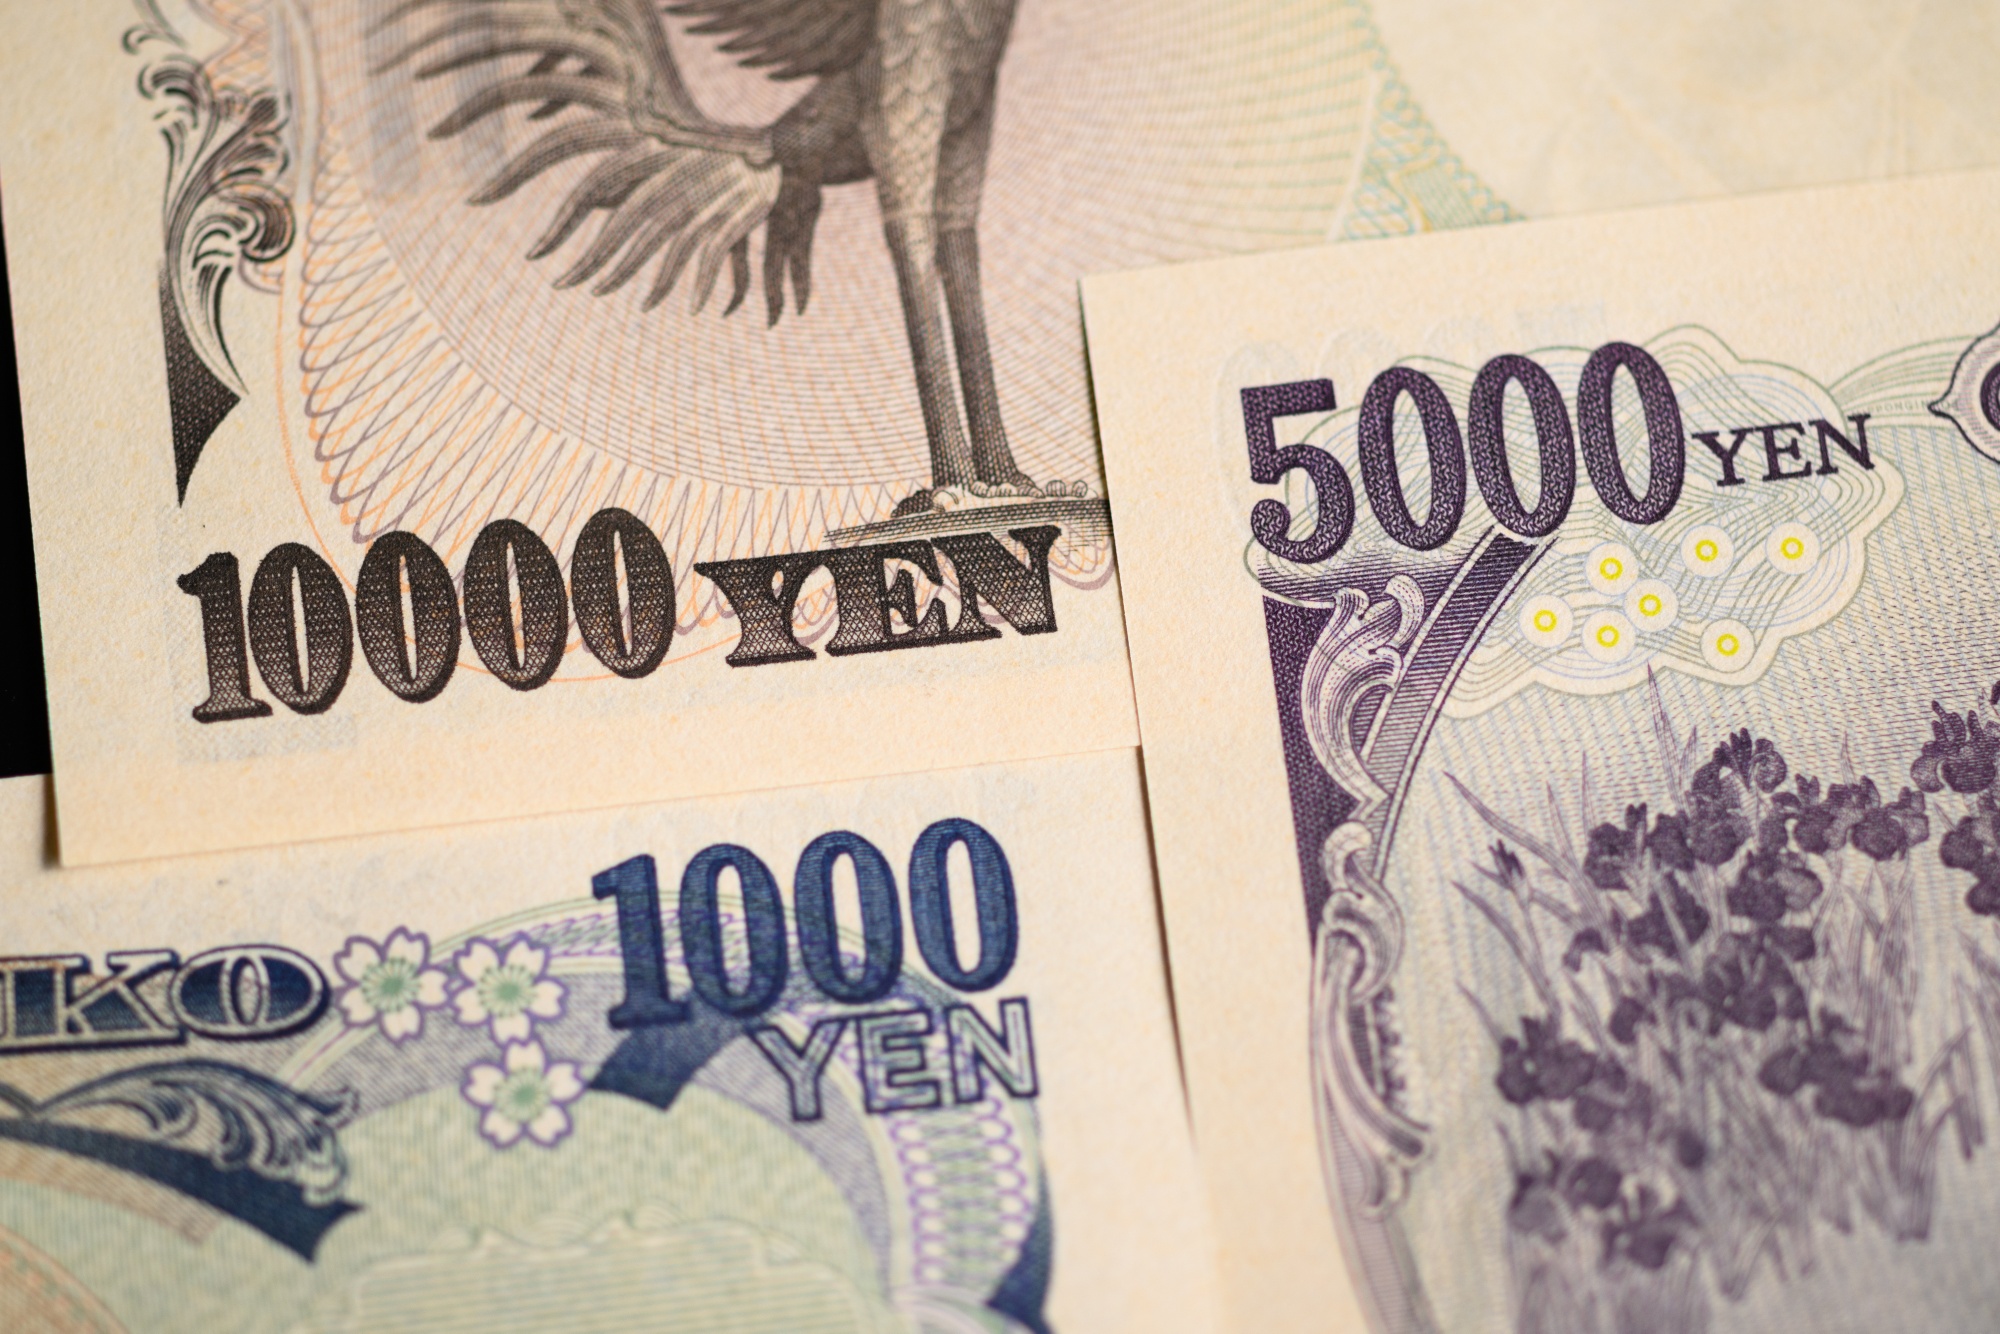 The yen fell to its lowest since 1992 against the yuan in late April.